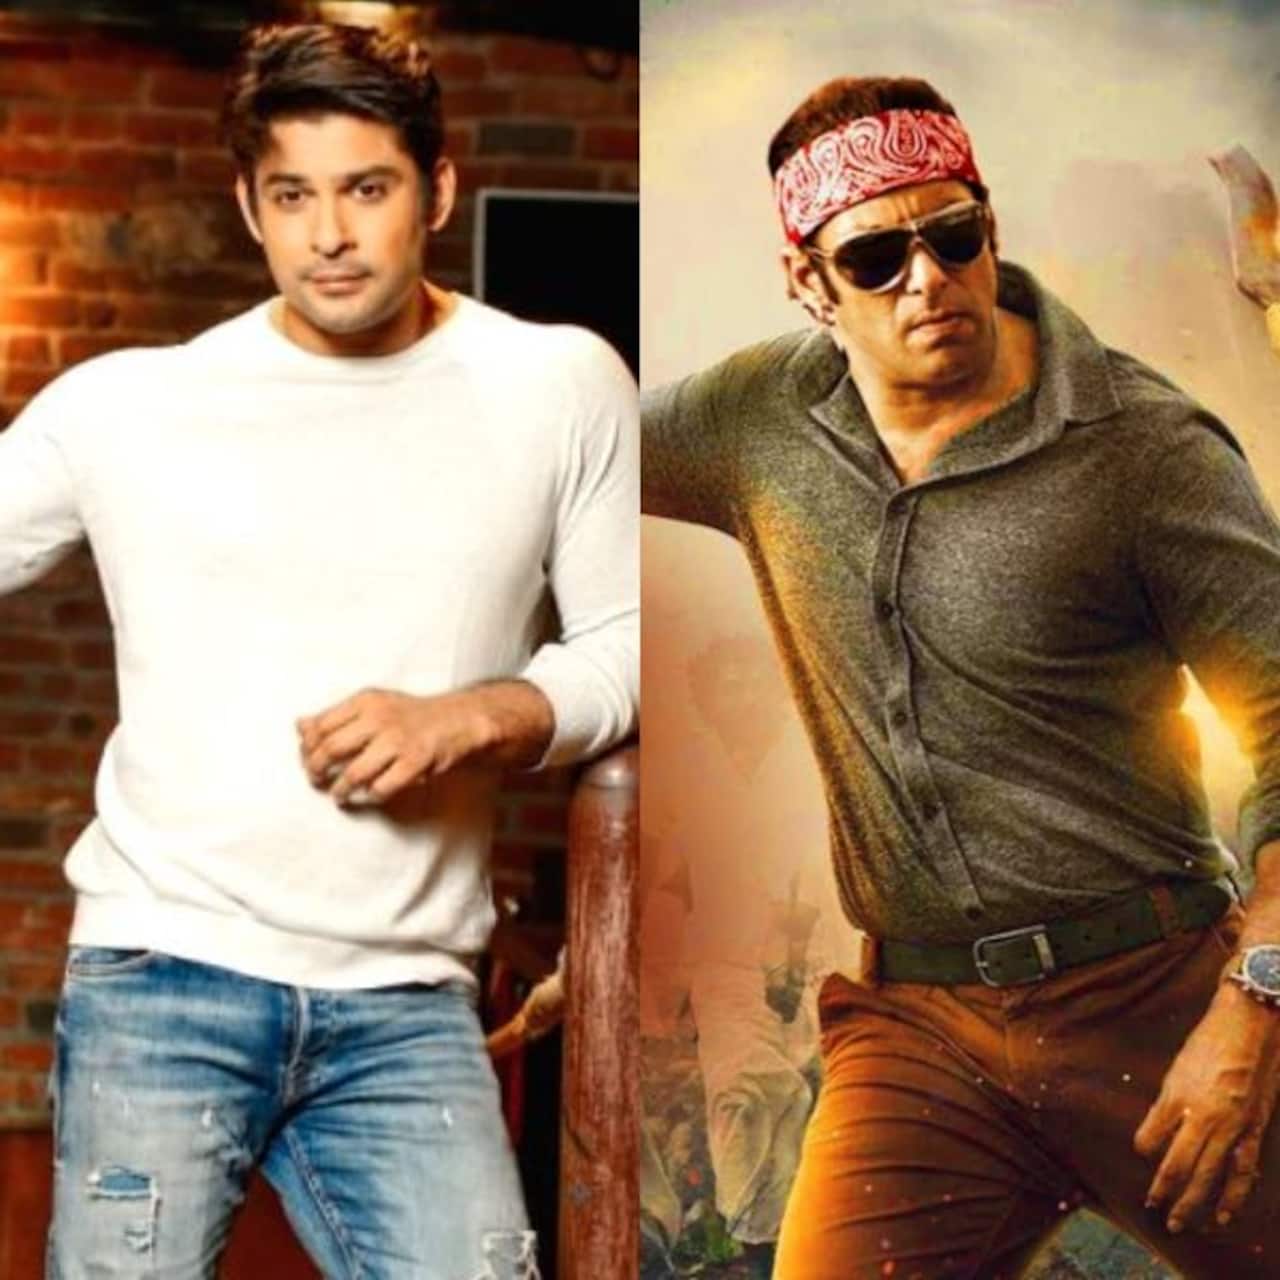 Bigg Boss 13 winner Sidharth Shukla to be a part of Salman Khan's Radhe: Your Most Wanted Bhai? — Here's what we know